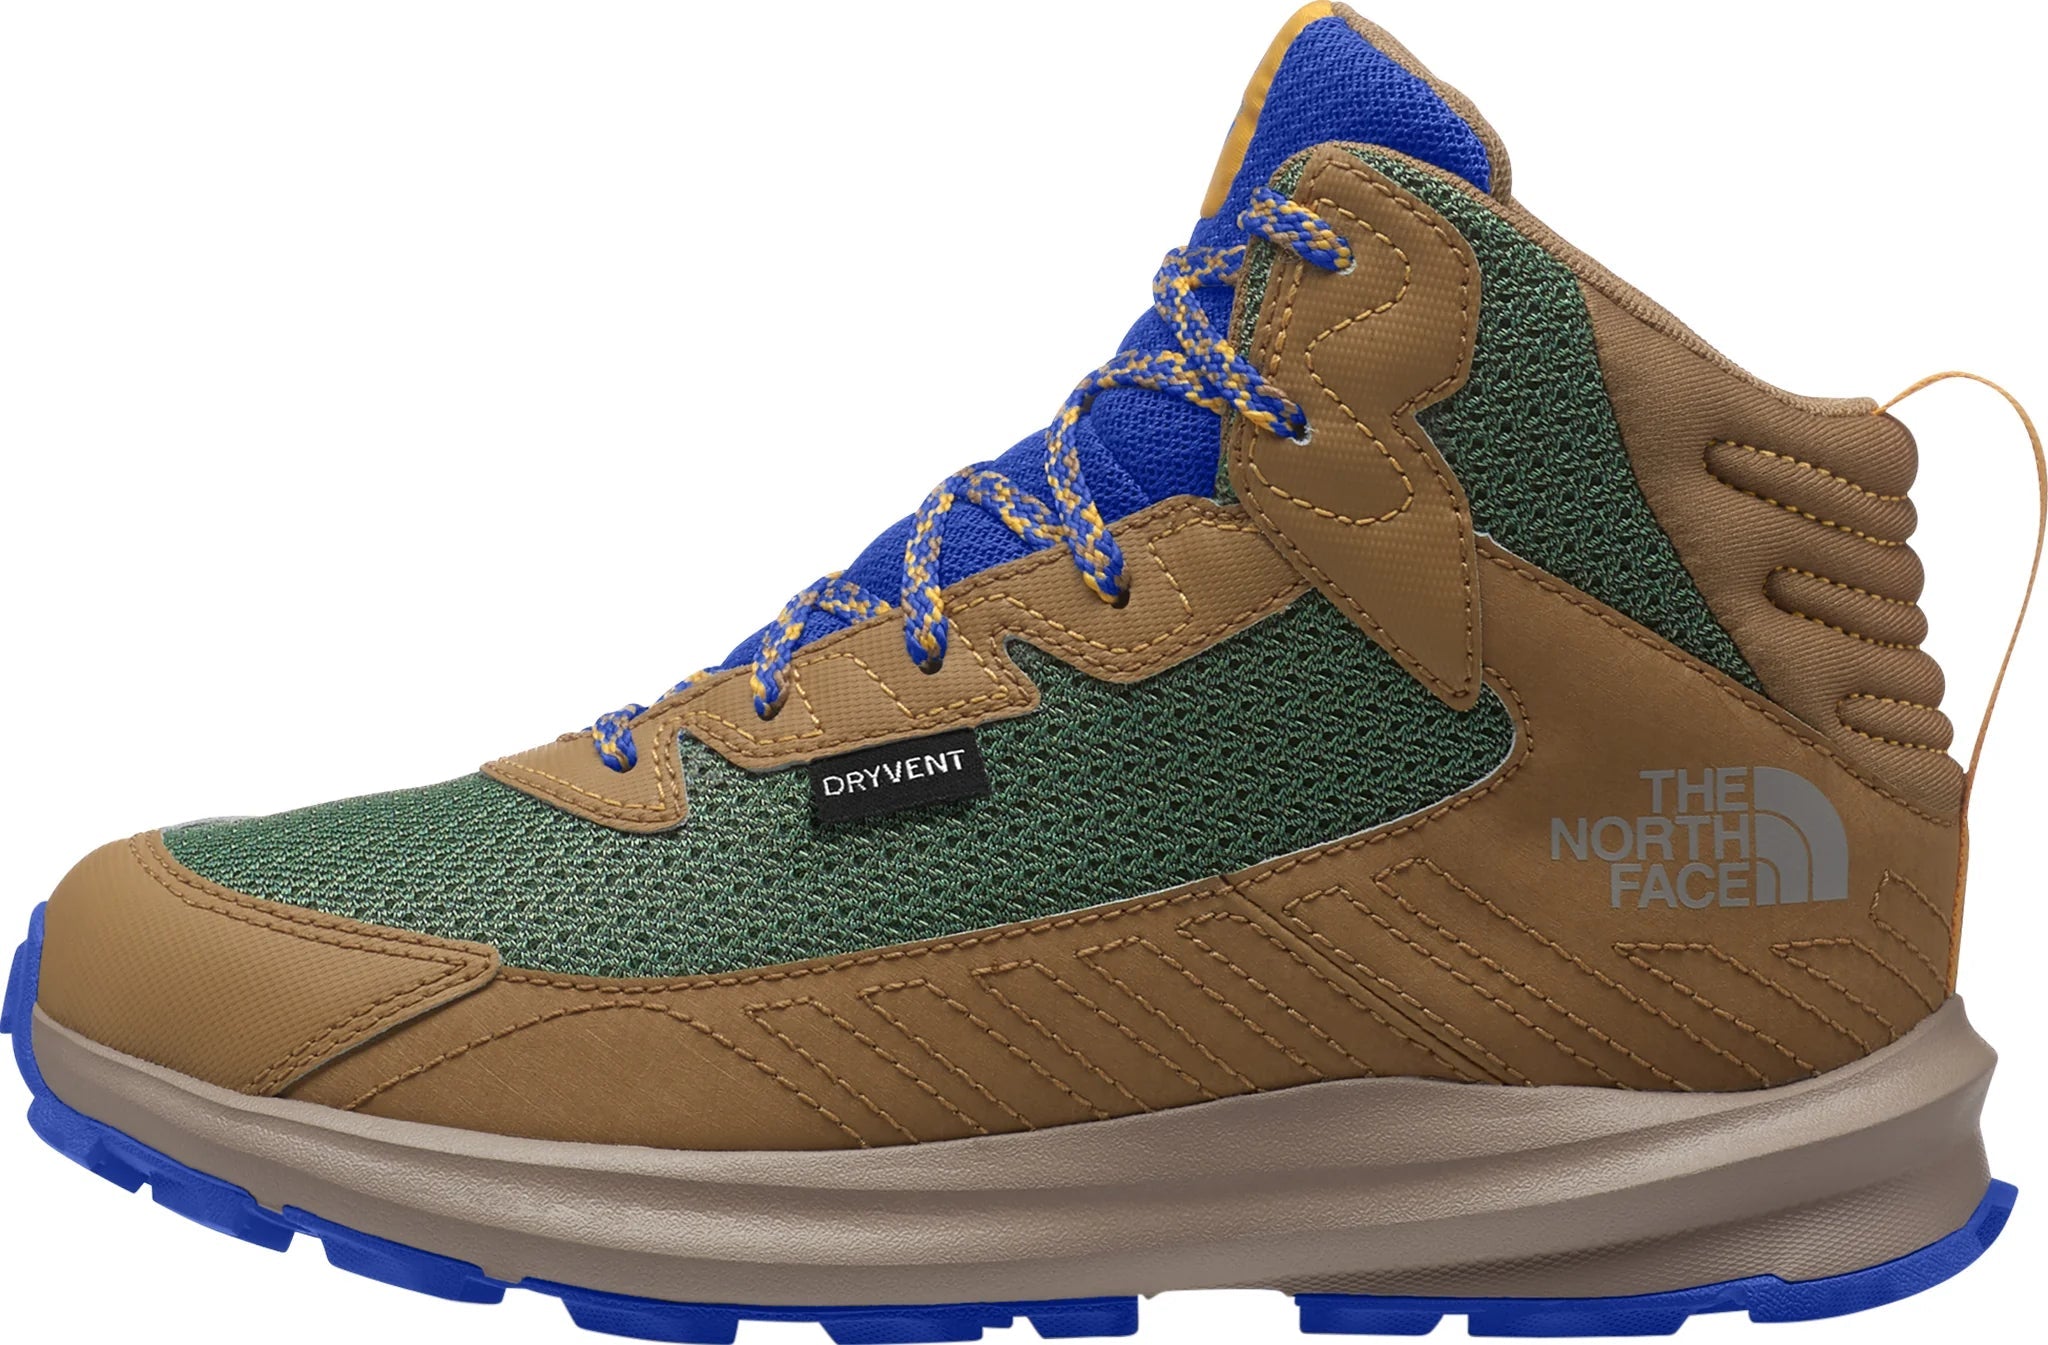 North Face Youth Fastpack Hiker Mid Waterproof Shoes - Mountain Kids Outfitters: Brown/Grass Green Color - White Background side view